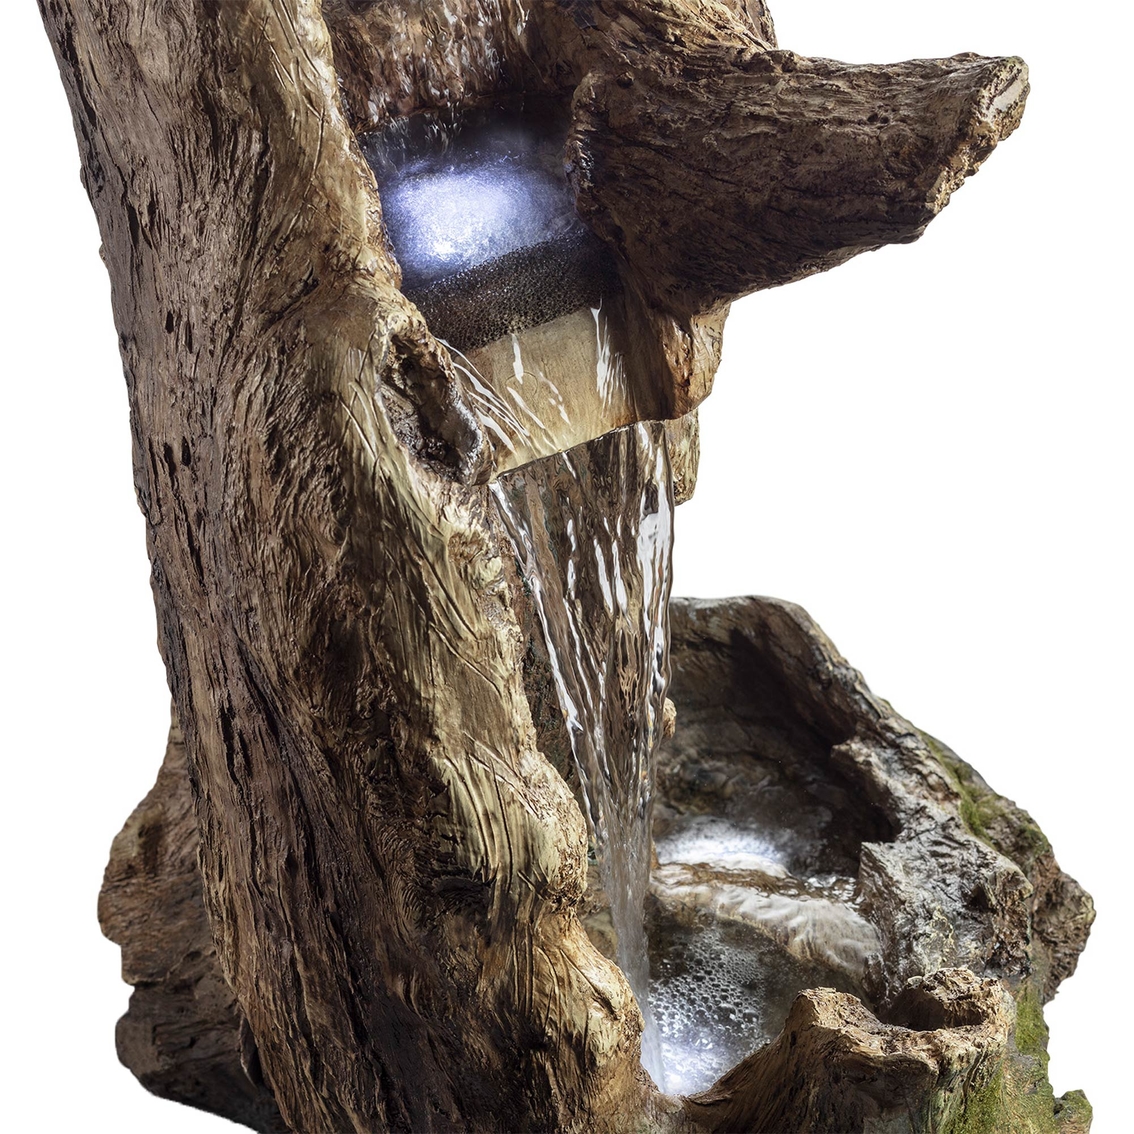 Alpine 41 in. Rainforest Waterfall Tree Trunk Fountain with LED Lights - Image 6 of 6